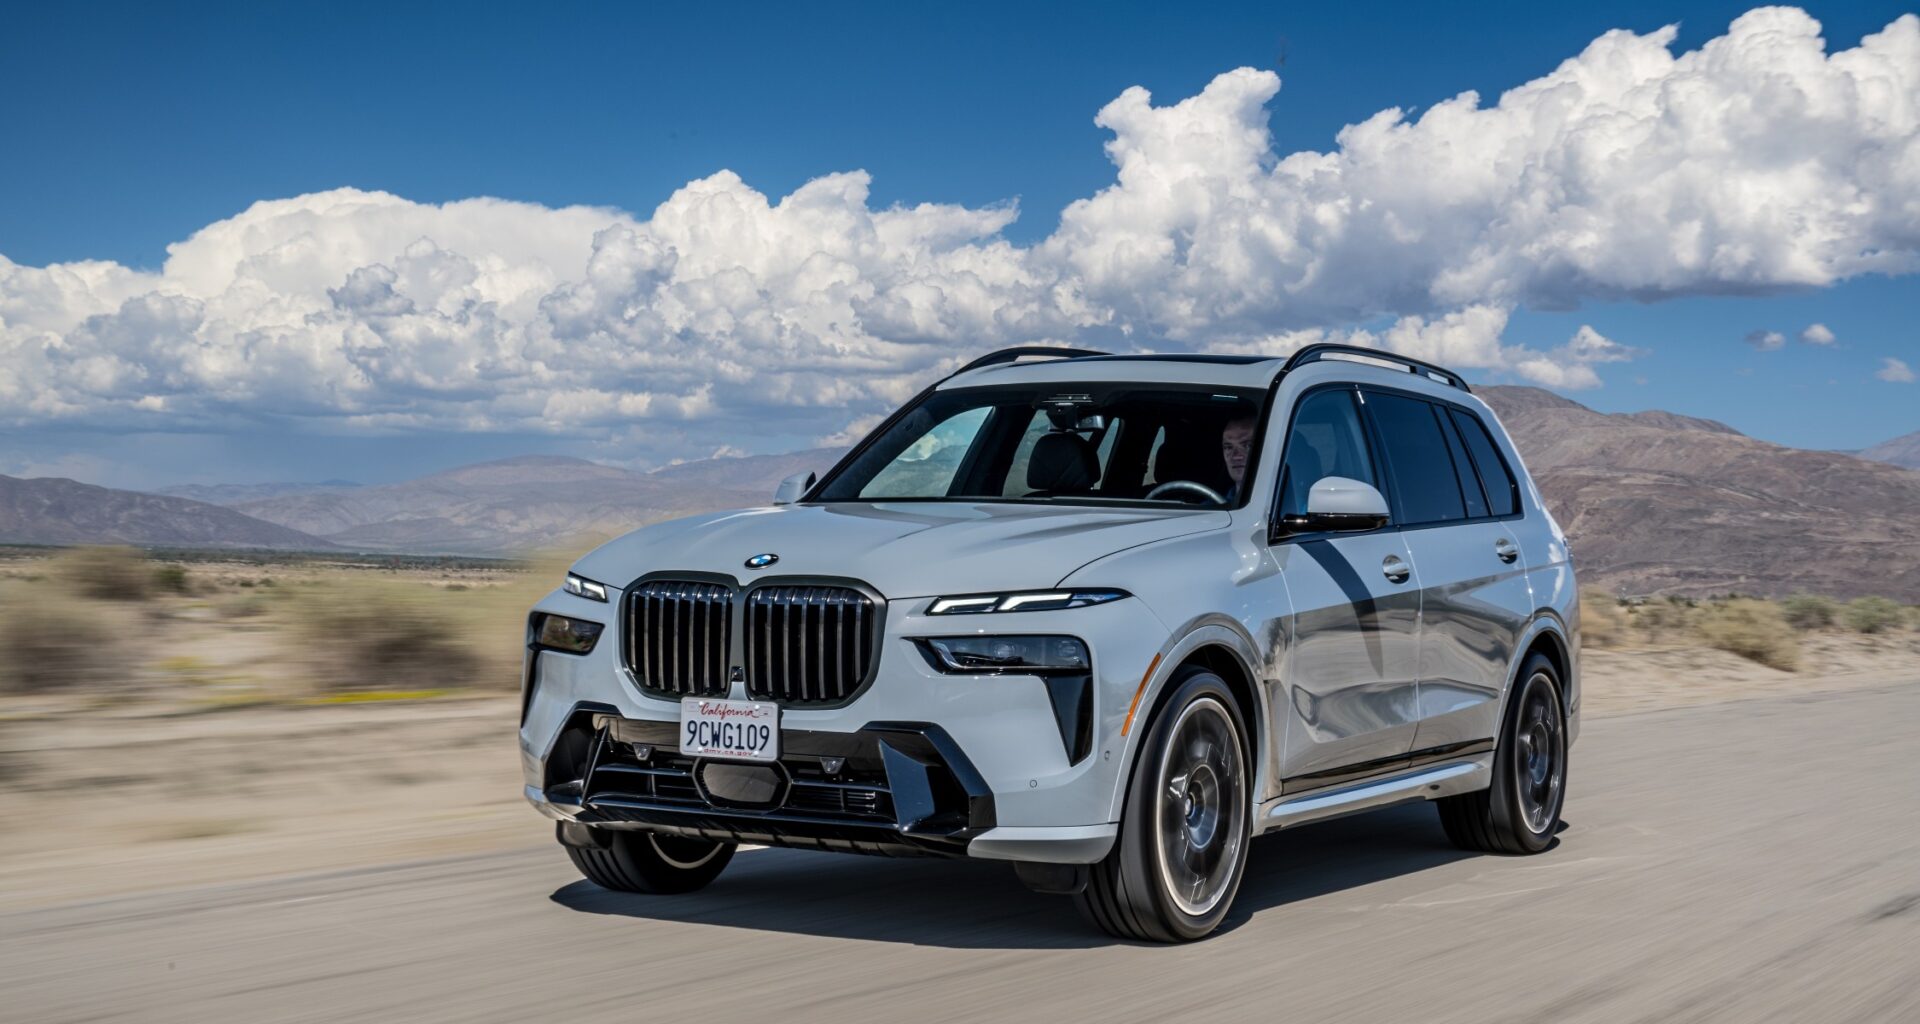 BMW SUV models for sale in Palm Springs